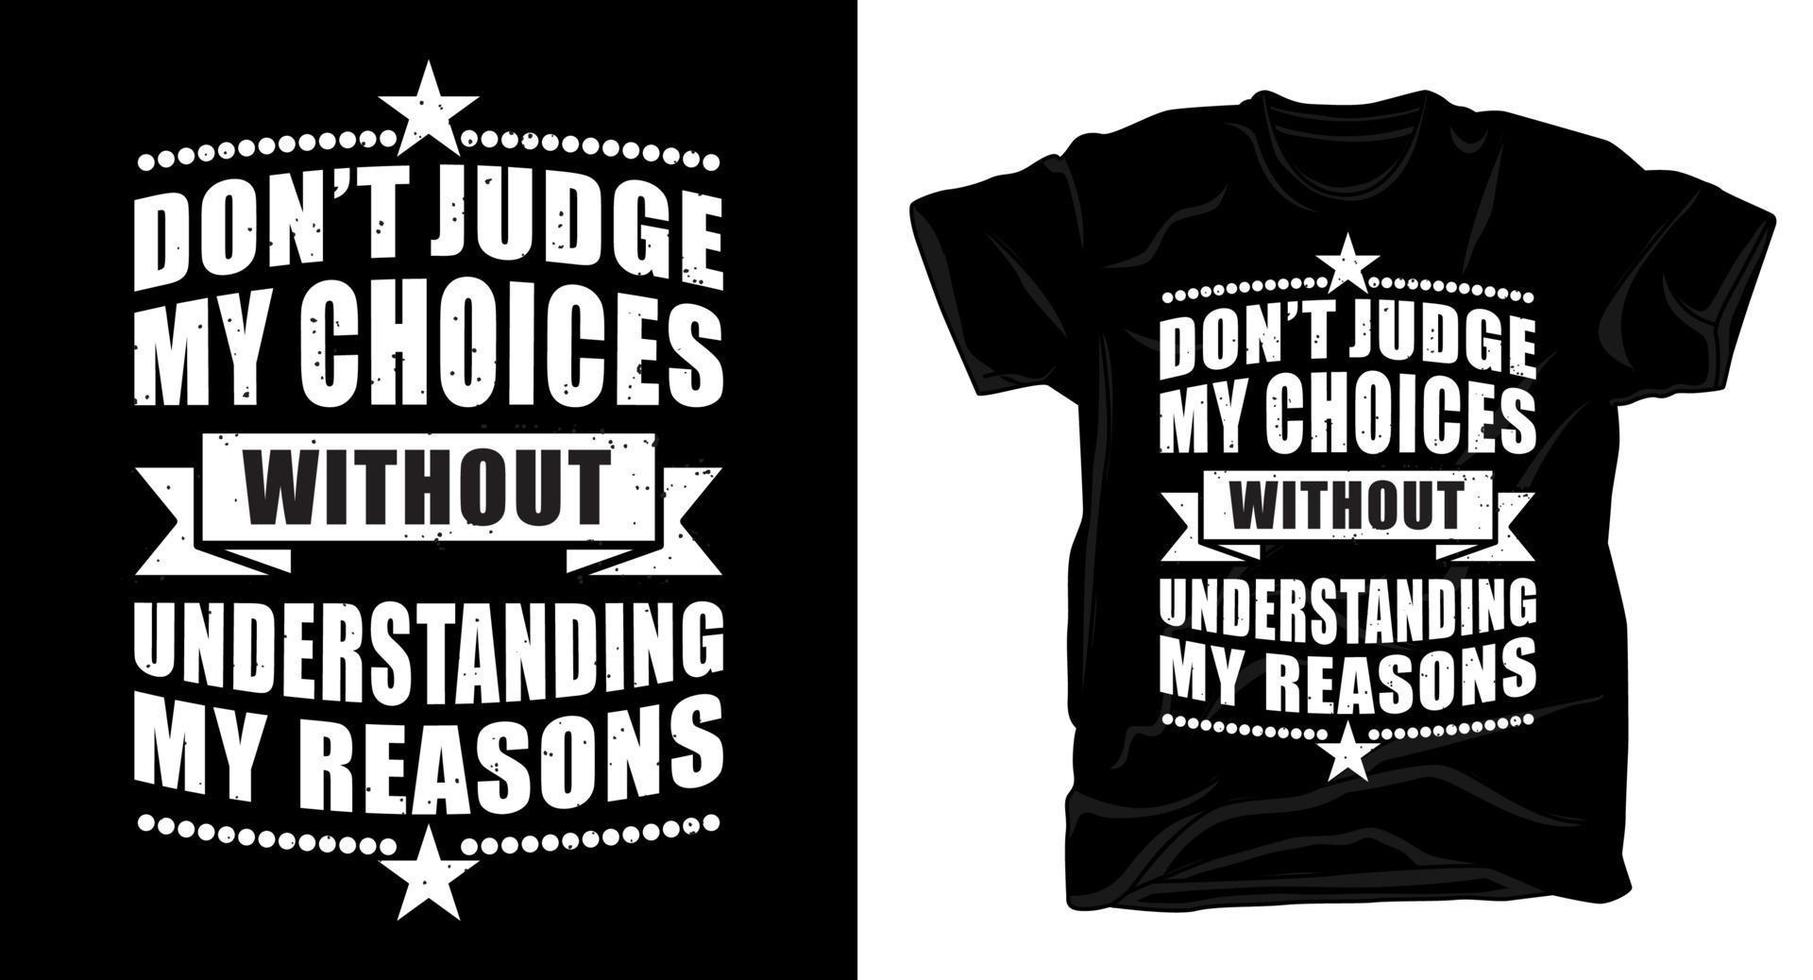 Don't judge my choices without understanding my reasons typography t-shirt design vector